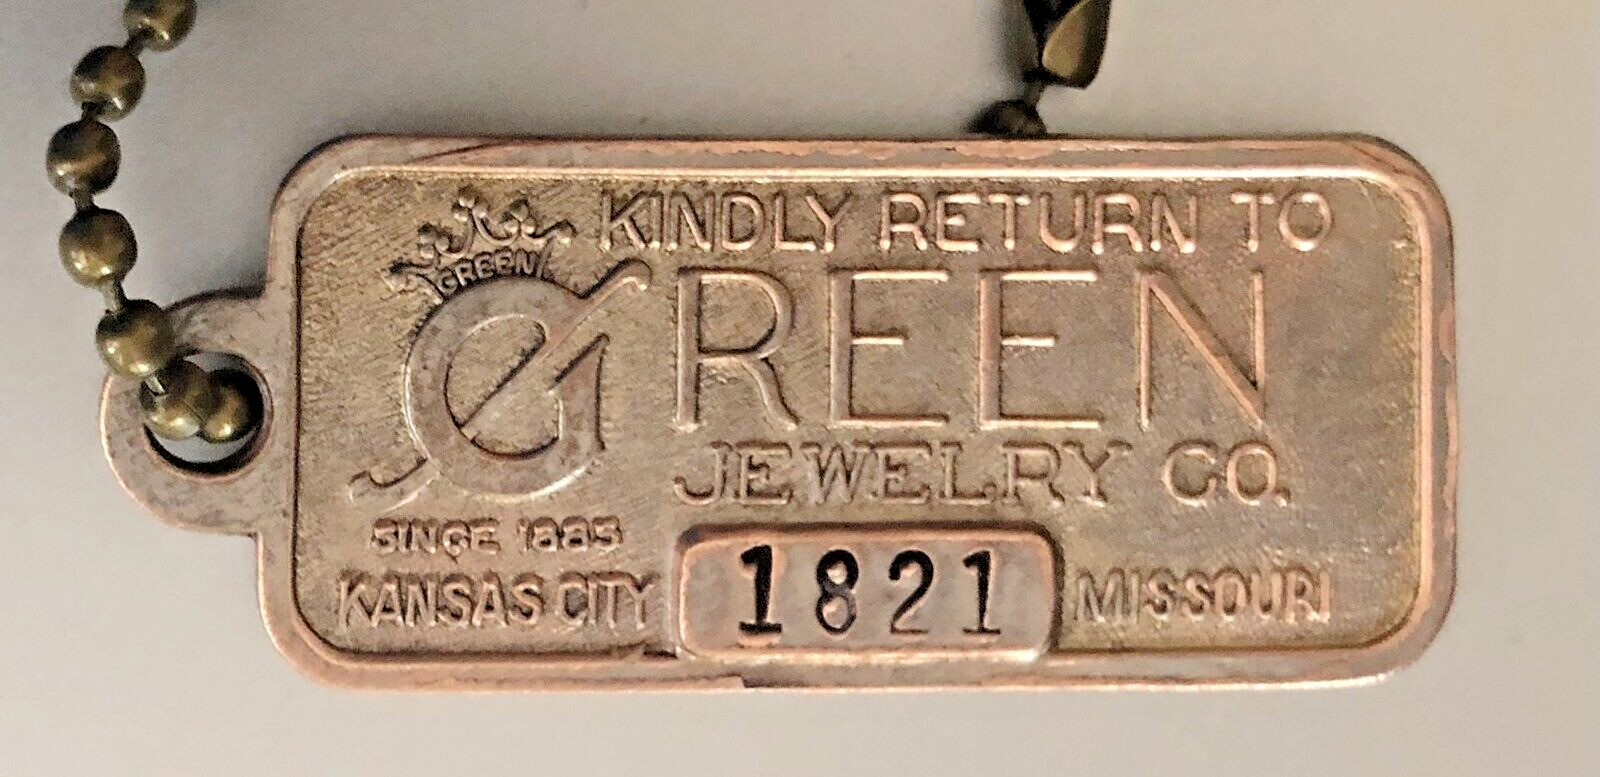 VTG Charge Coin Tag: GREEN JEWELRY CO; Kansas City Missouri; #1891